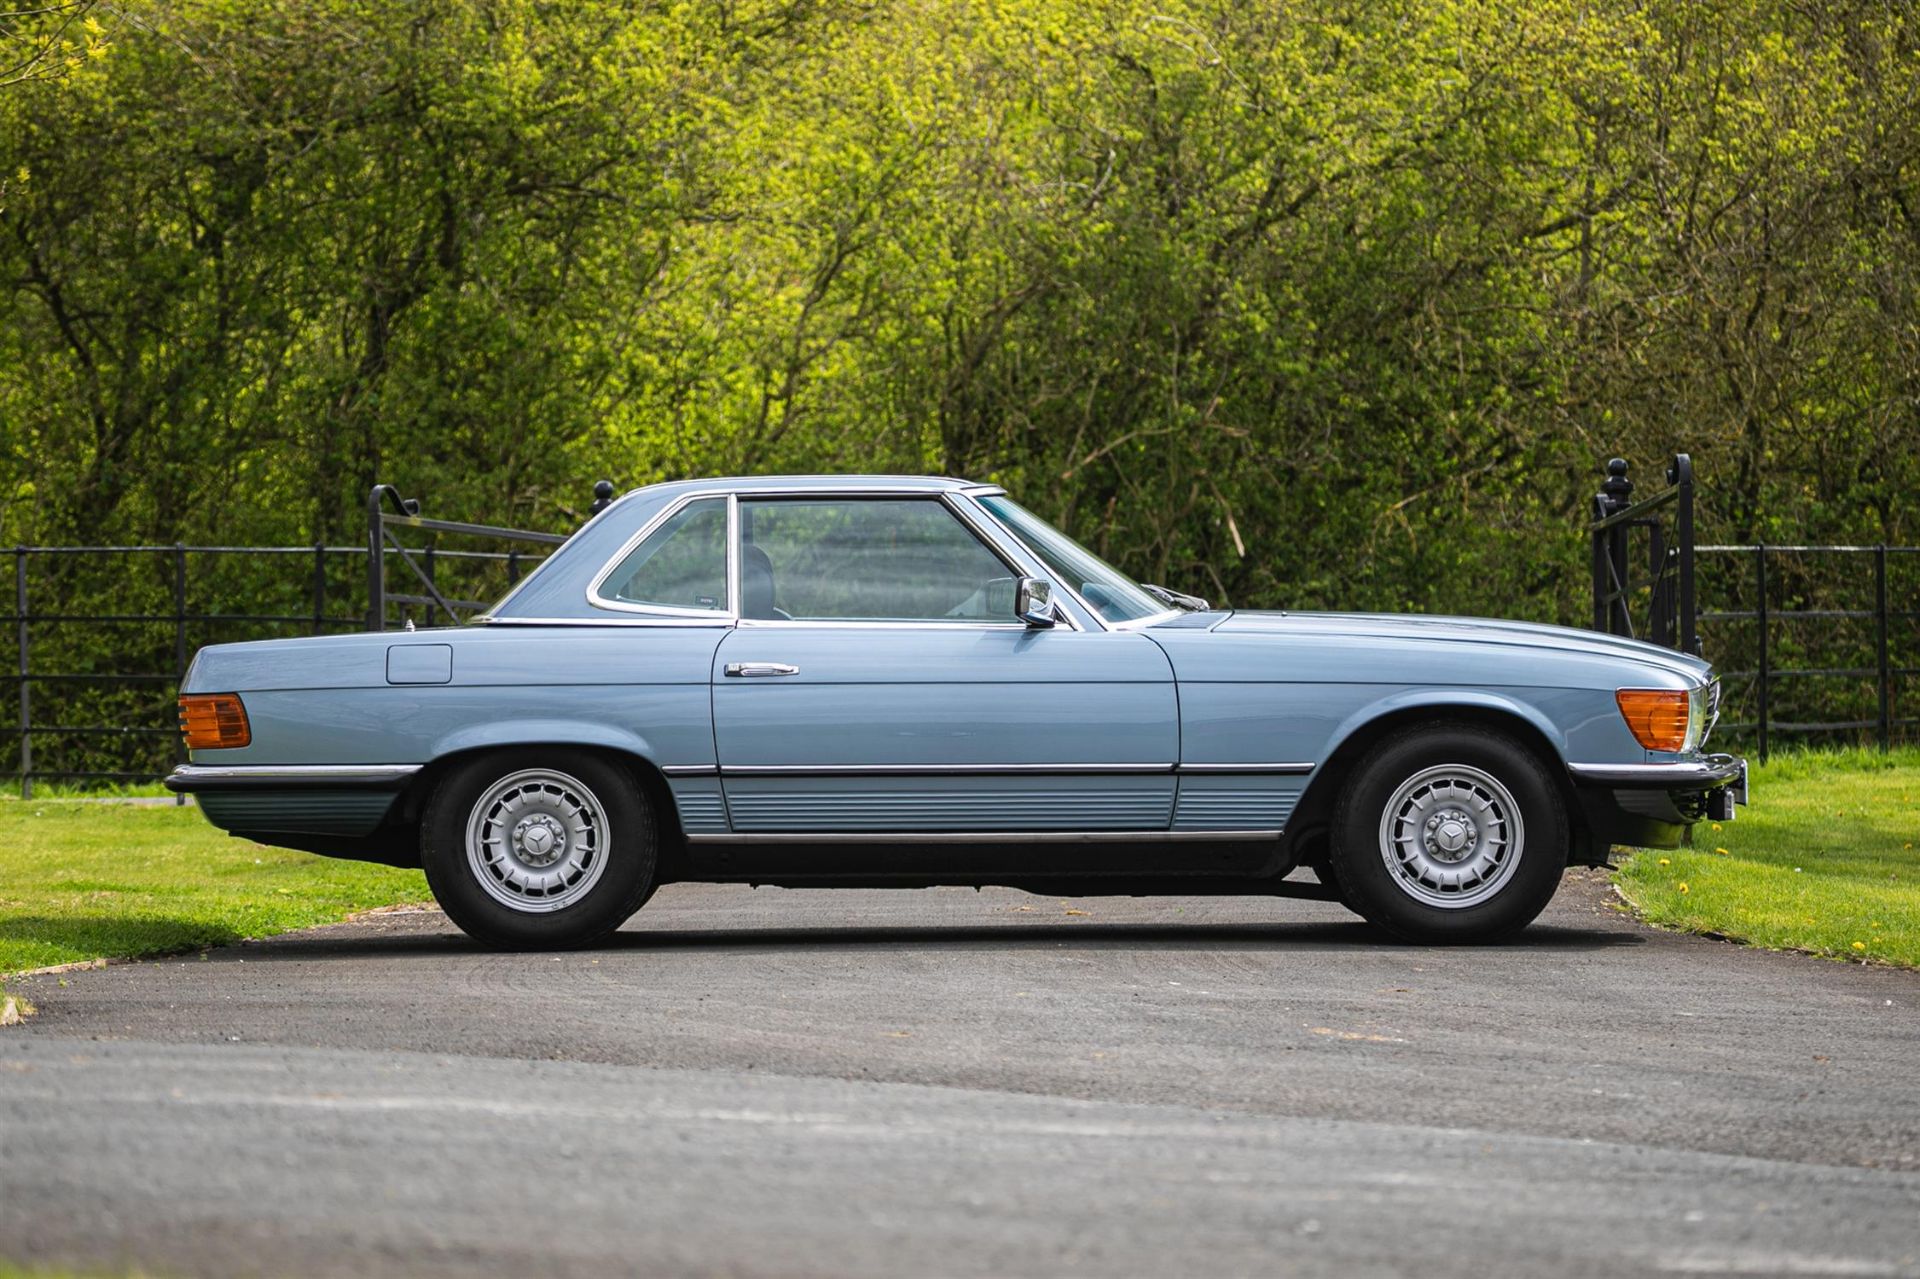 1985 Mercedes Benz 280SL (R107) with hardtop - 28,700 Miles - Image 5 of 10